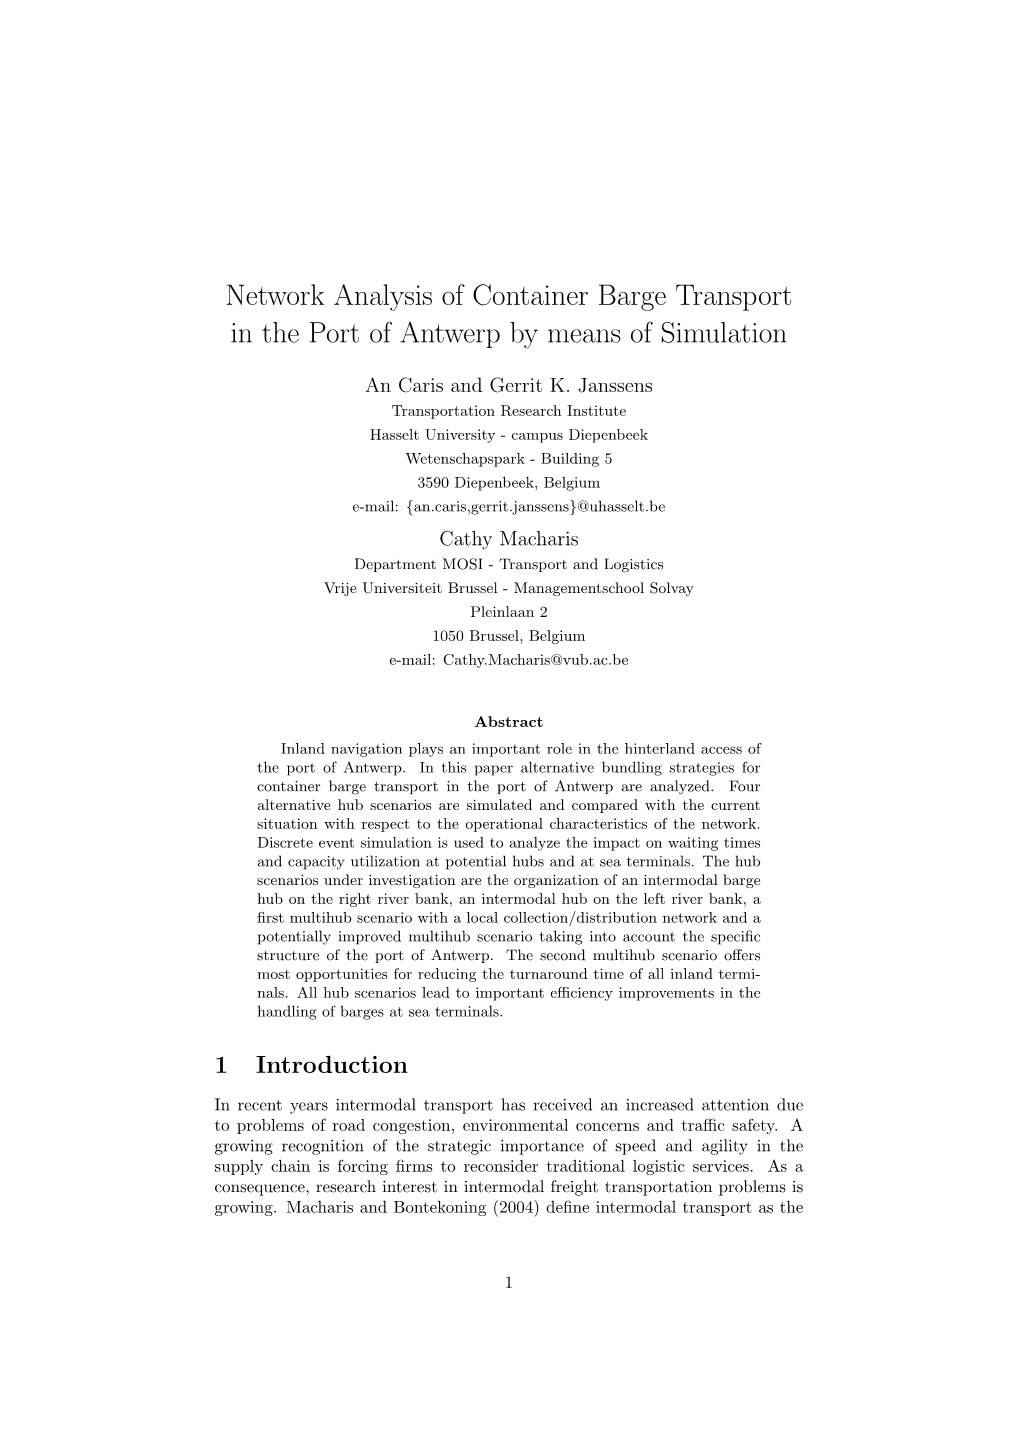 Network Analysis of Container Barge Transport in the Port of Antwerp by Means of Simulation